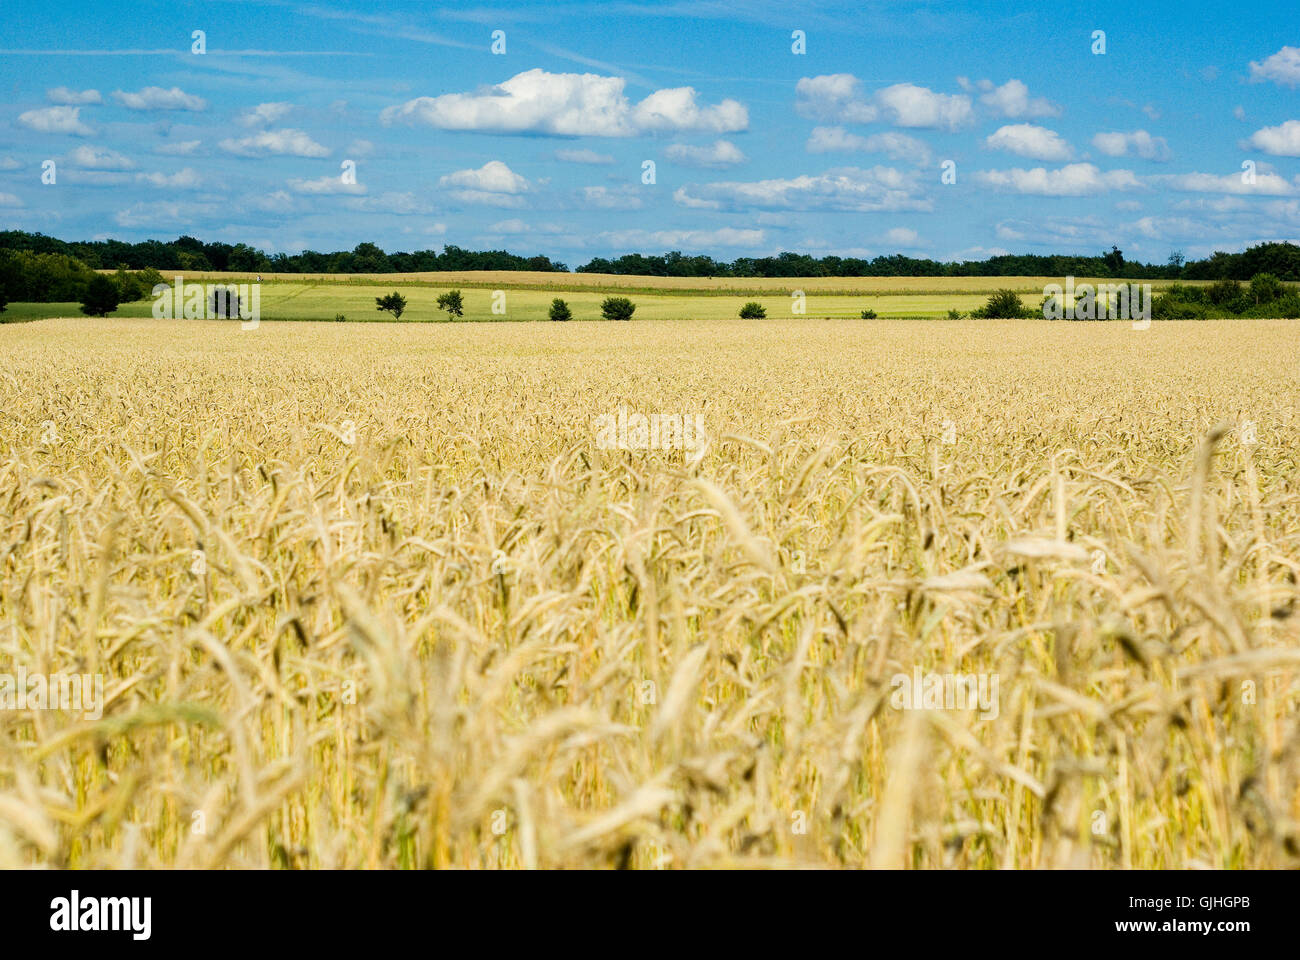 bucolic agriculture farming Stock Photo